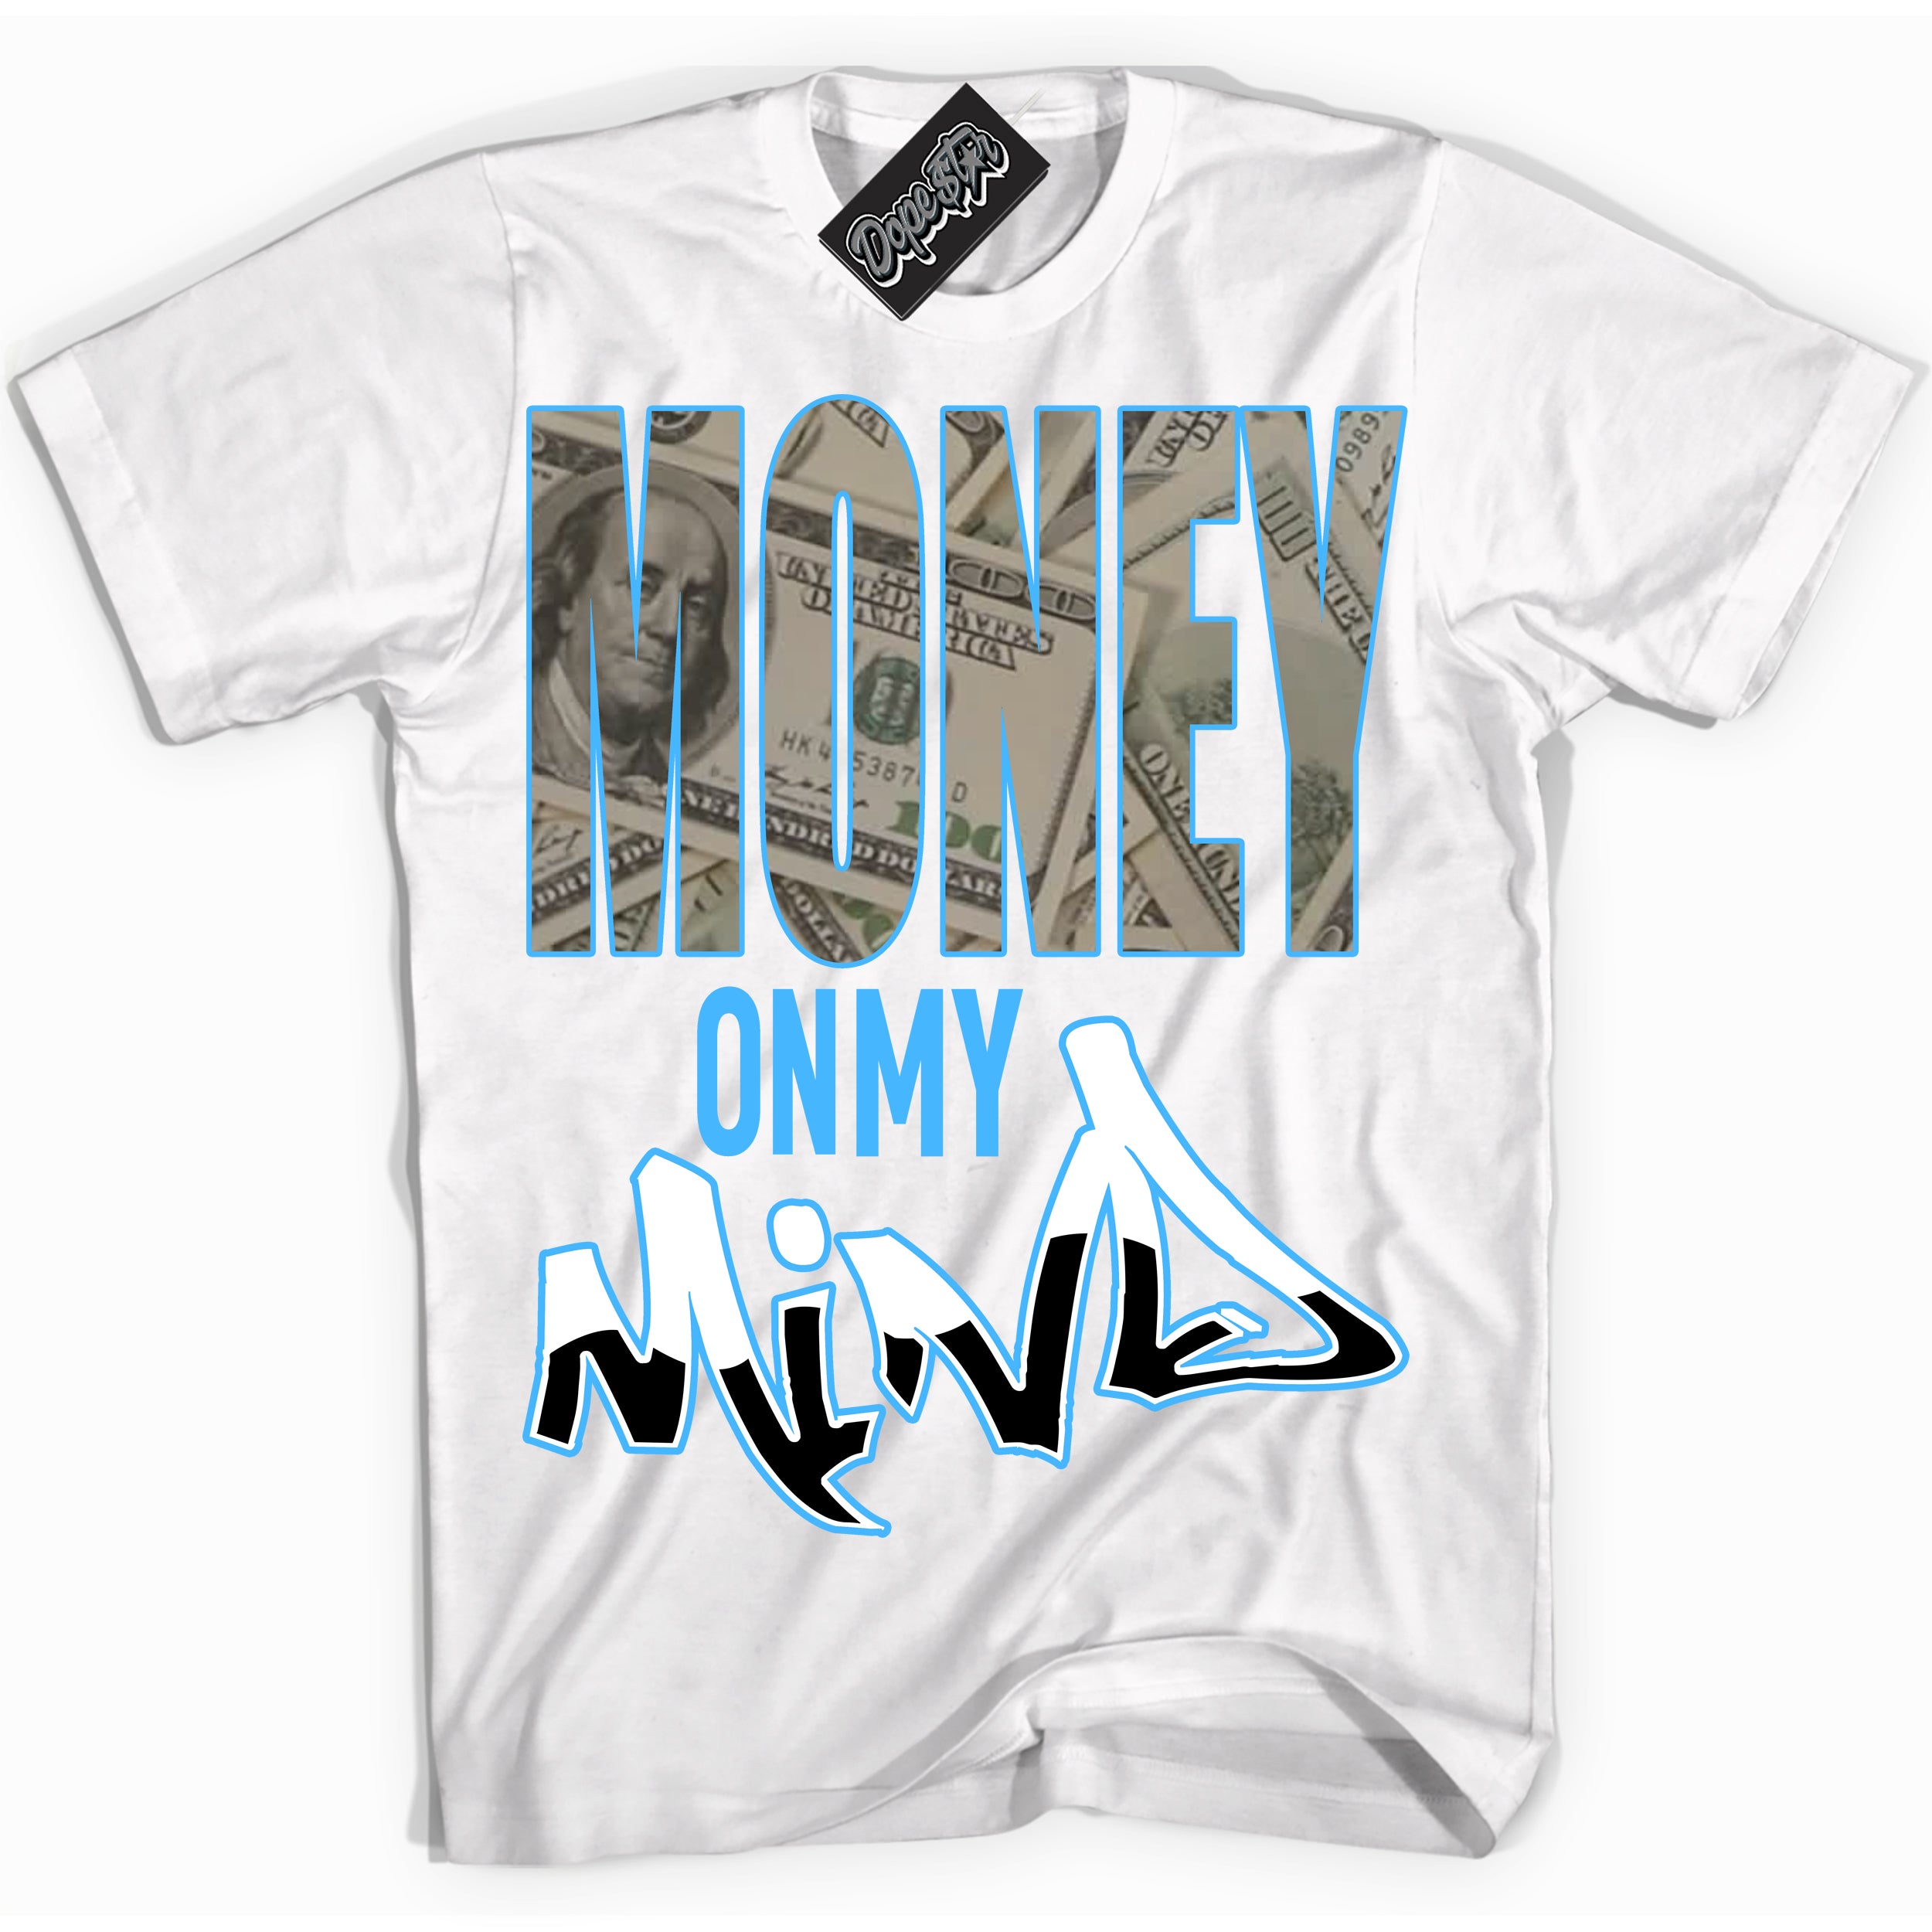 Cool White graphic tee with “ Money On My Mind ” design, that perfectly matches Powder Blue 9s sneakers 